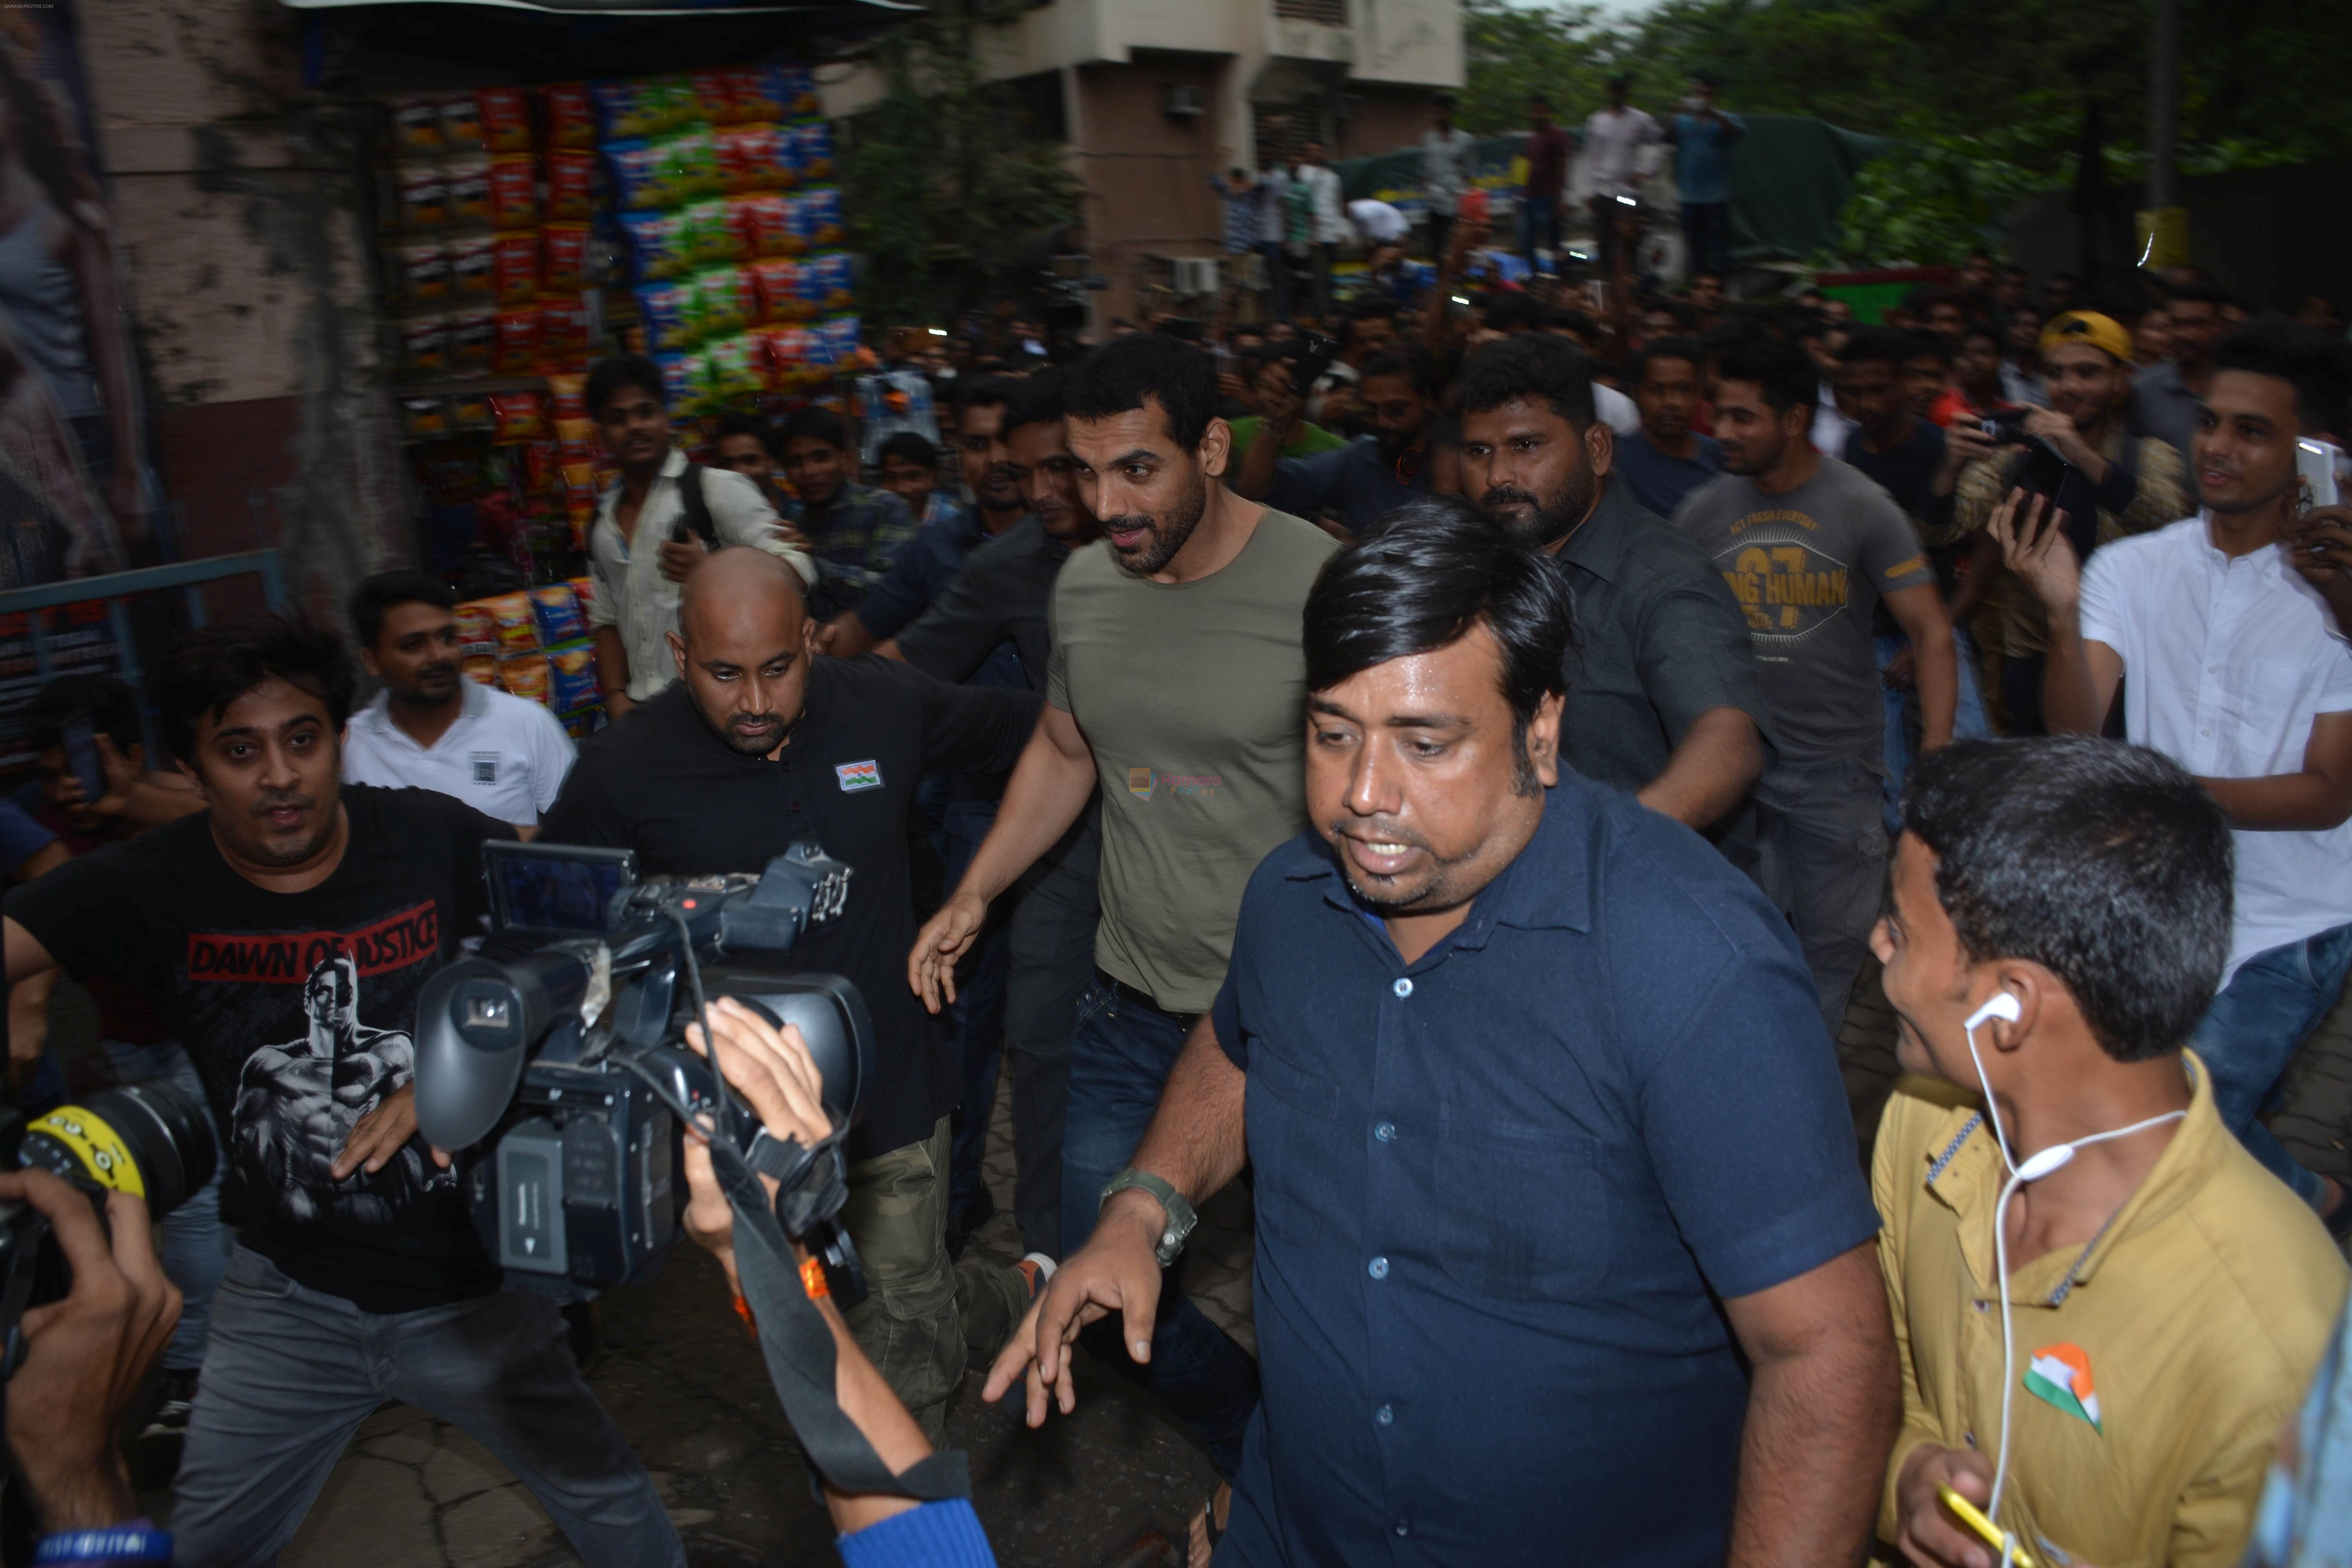 John Abraham visits the Gaiety theatre in bandra to check the audience response to his film Satyamev Jayate on 15th Aug 2018